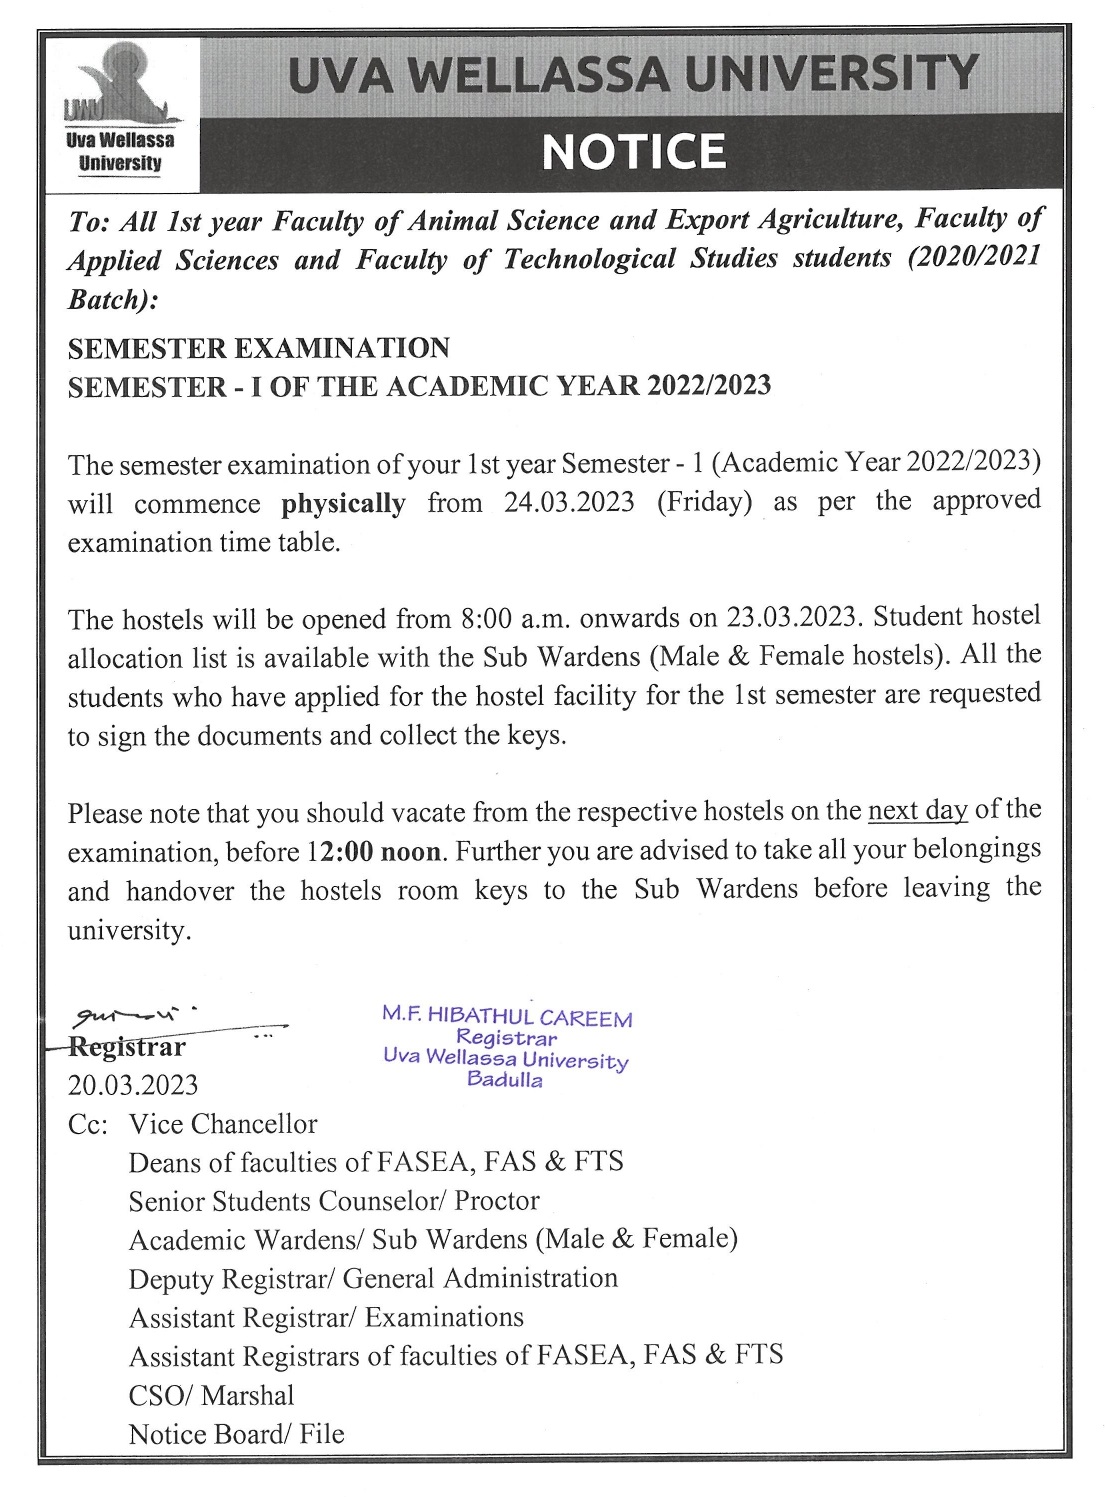 1-1 Semester Examination for FASEA FAS FTS 20-21 Batch (revised)_page-0001